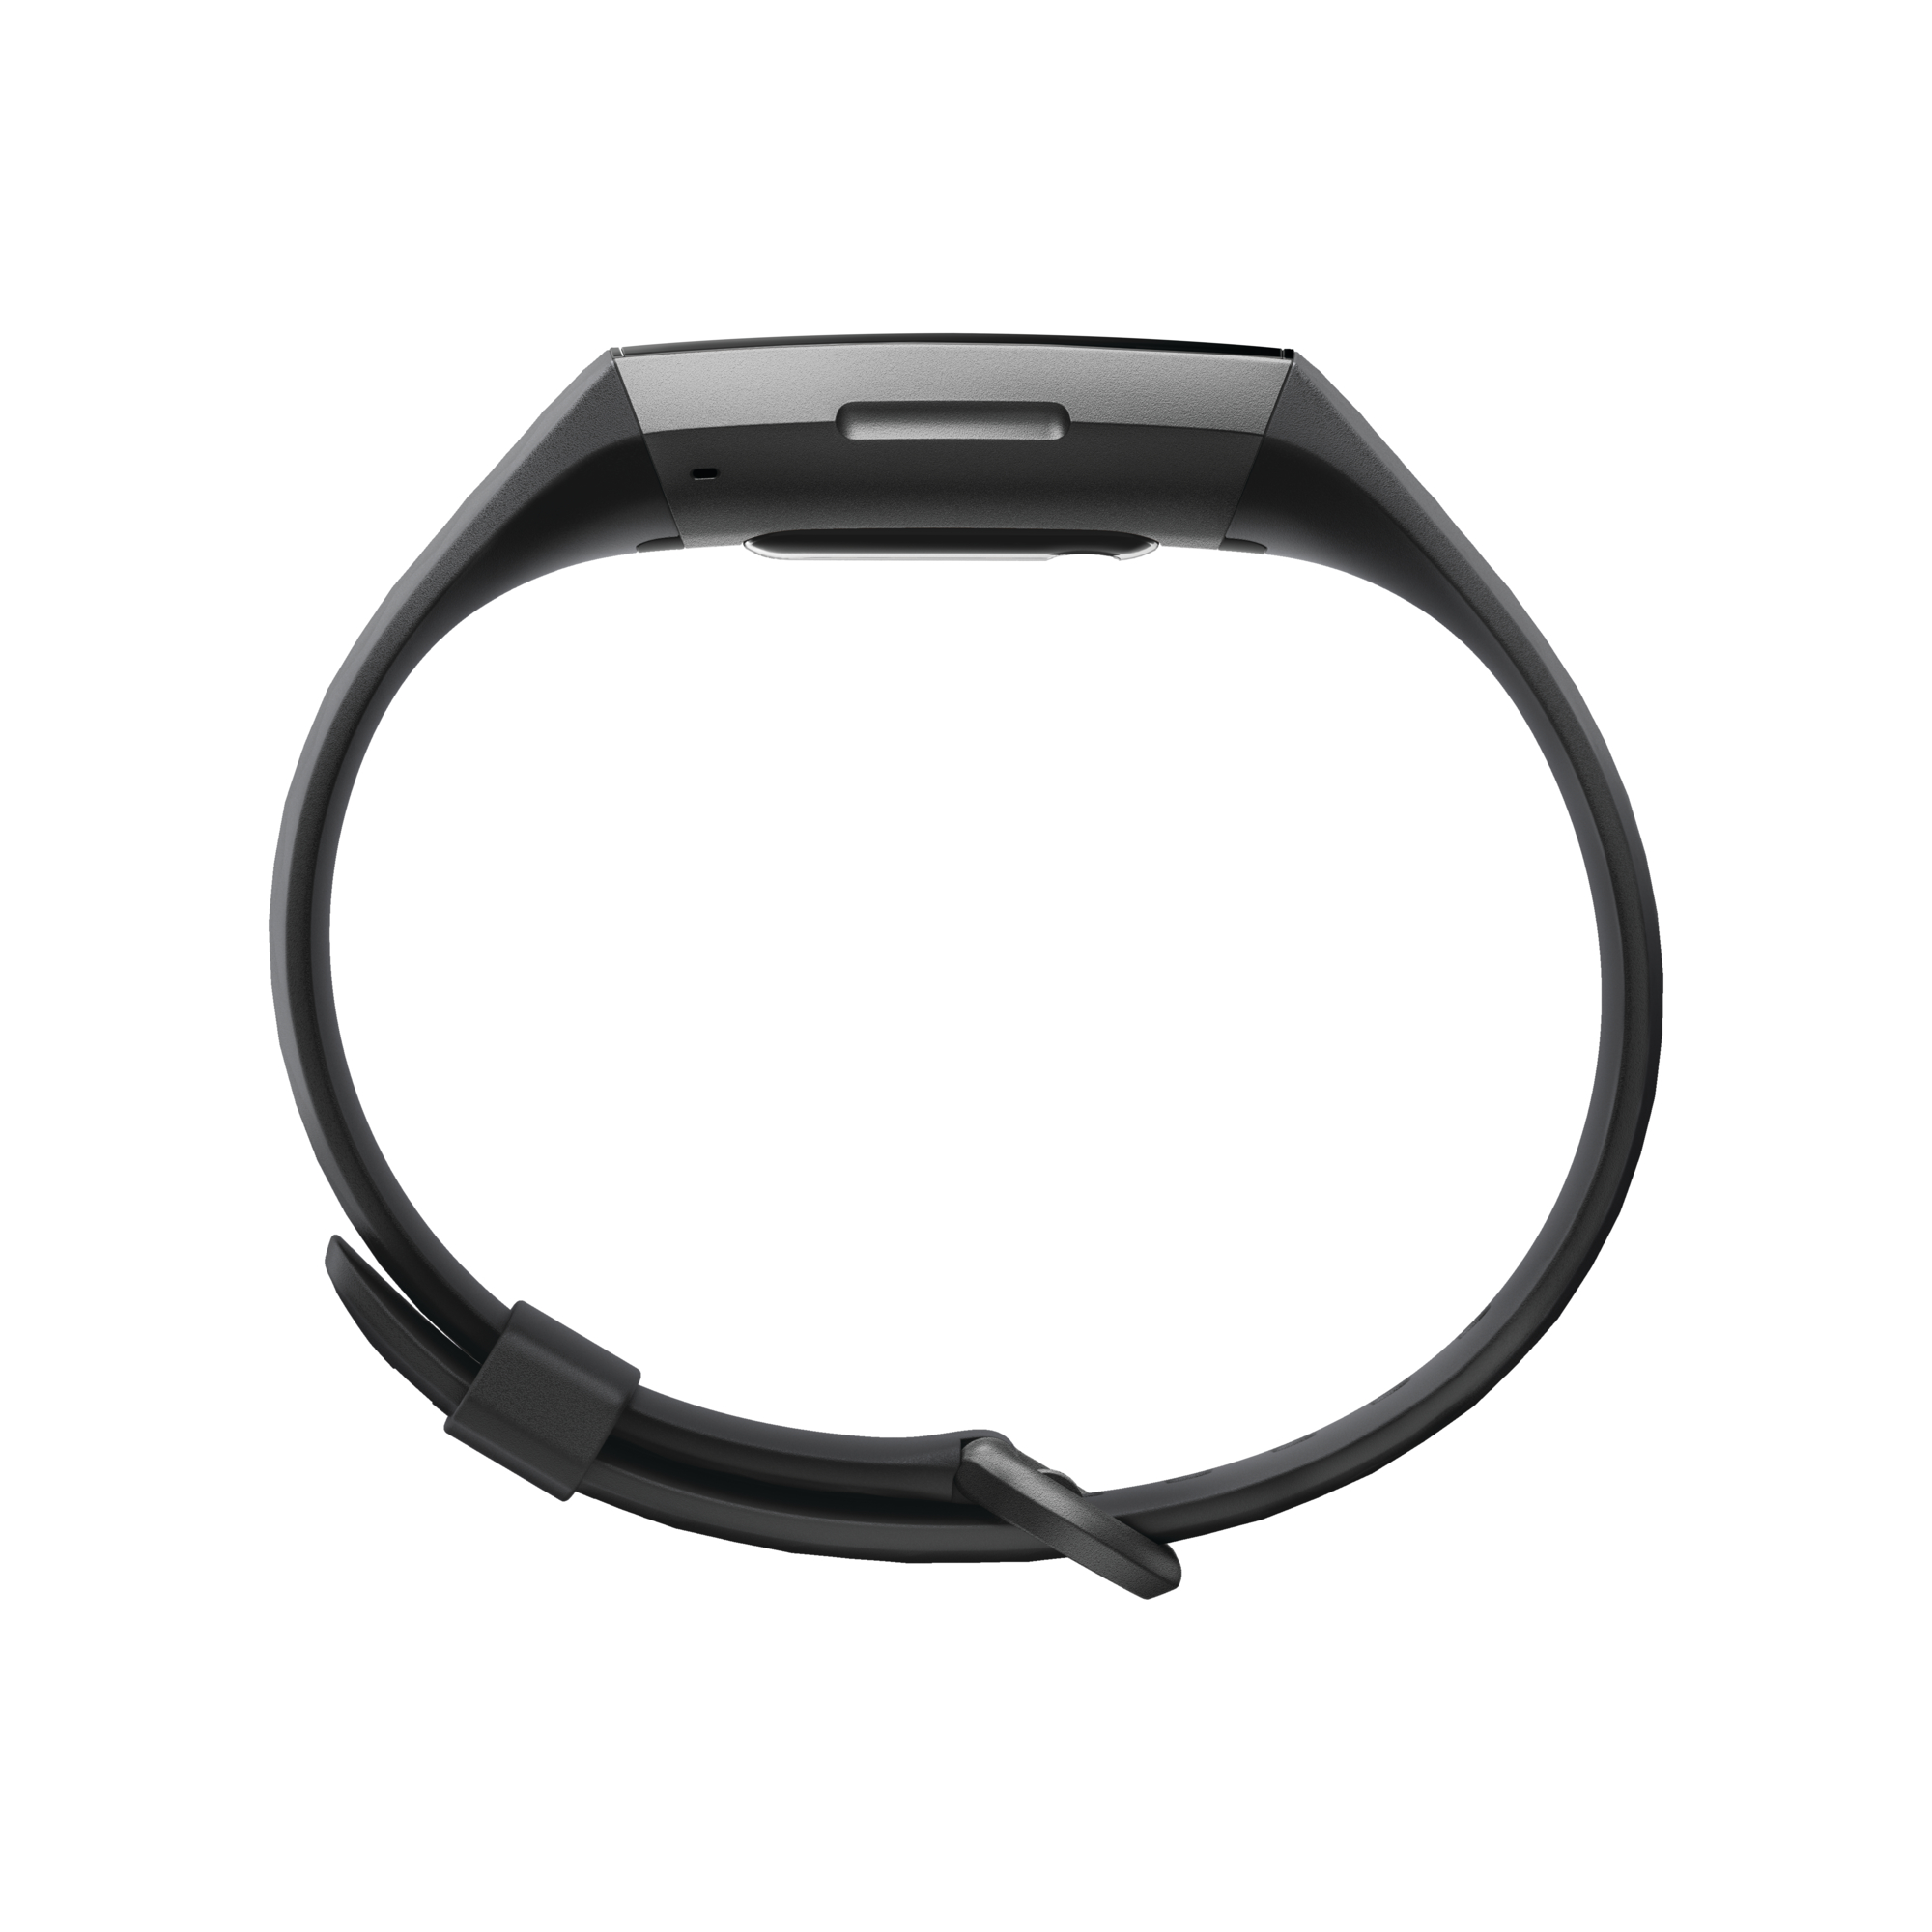 Fitbit Charge 3, Fitness Activity Tracker - image 6 of 11